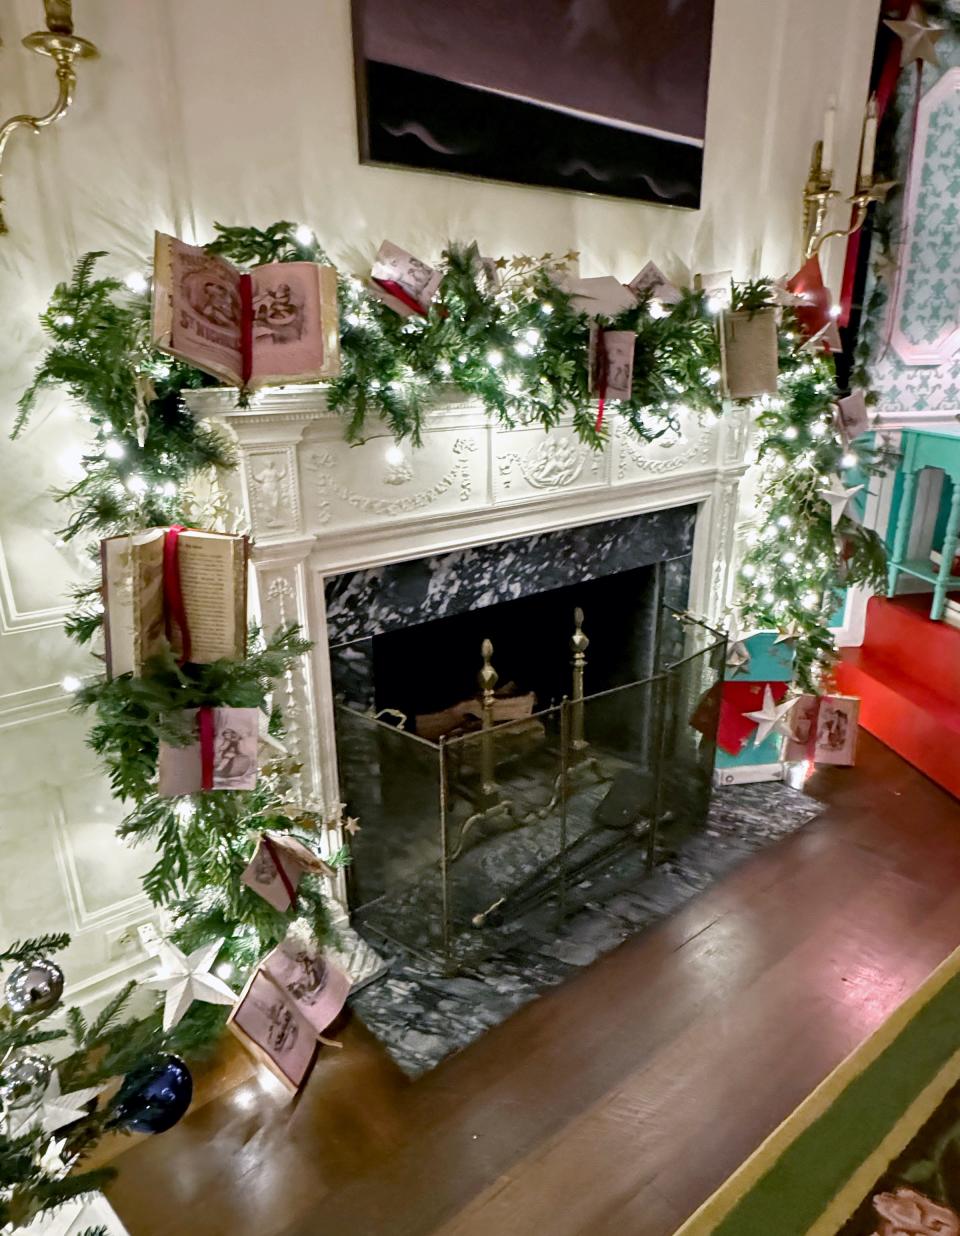 Mindy Shubert Geist help adorn a mantel at the White House with decorations made to look like open books.